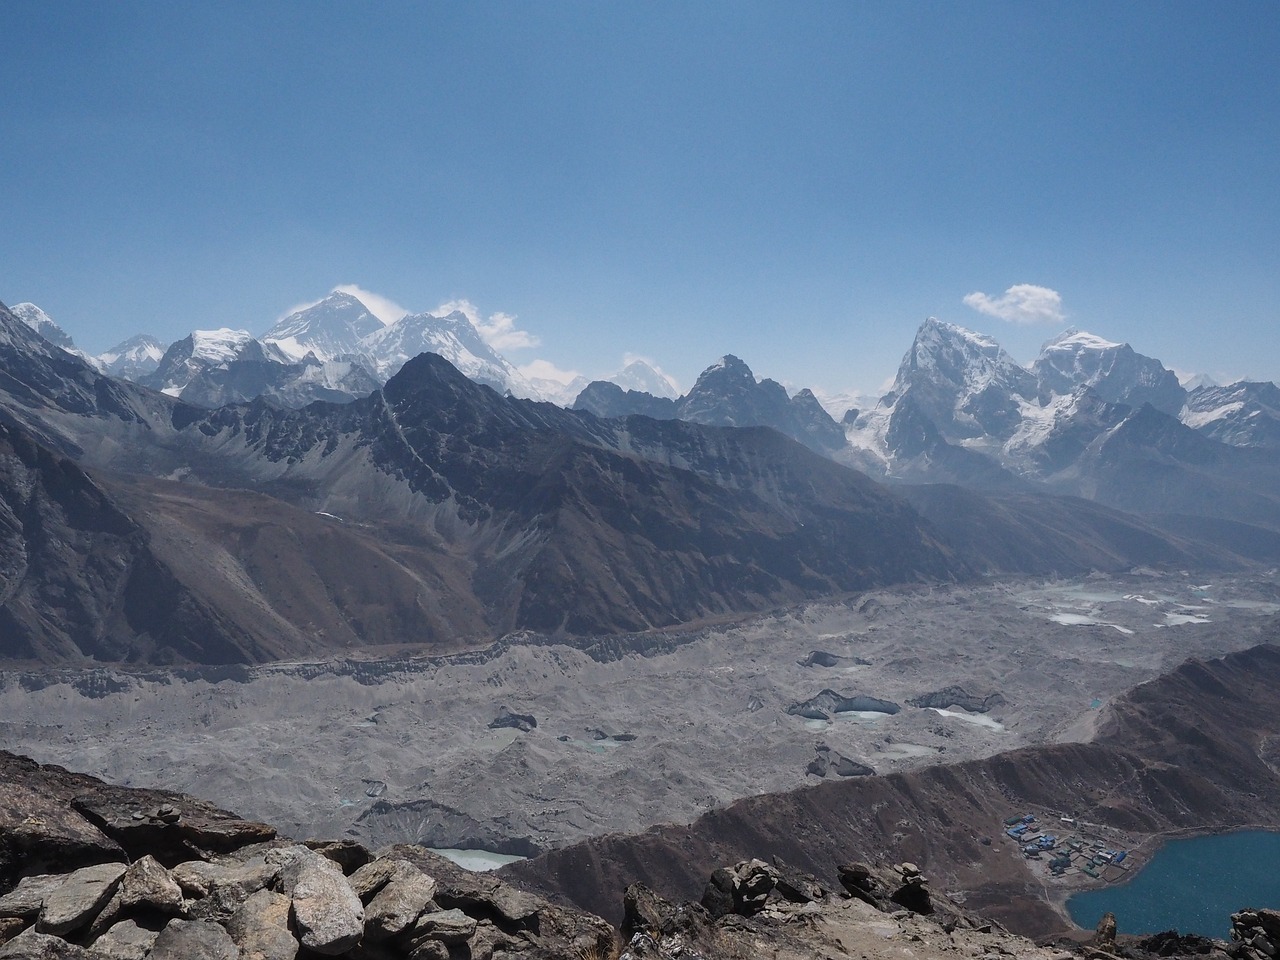 Things you should know about Trekking in the Everest Region